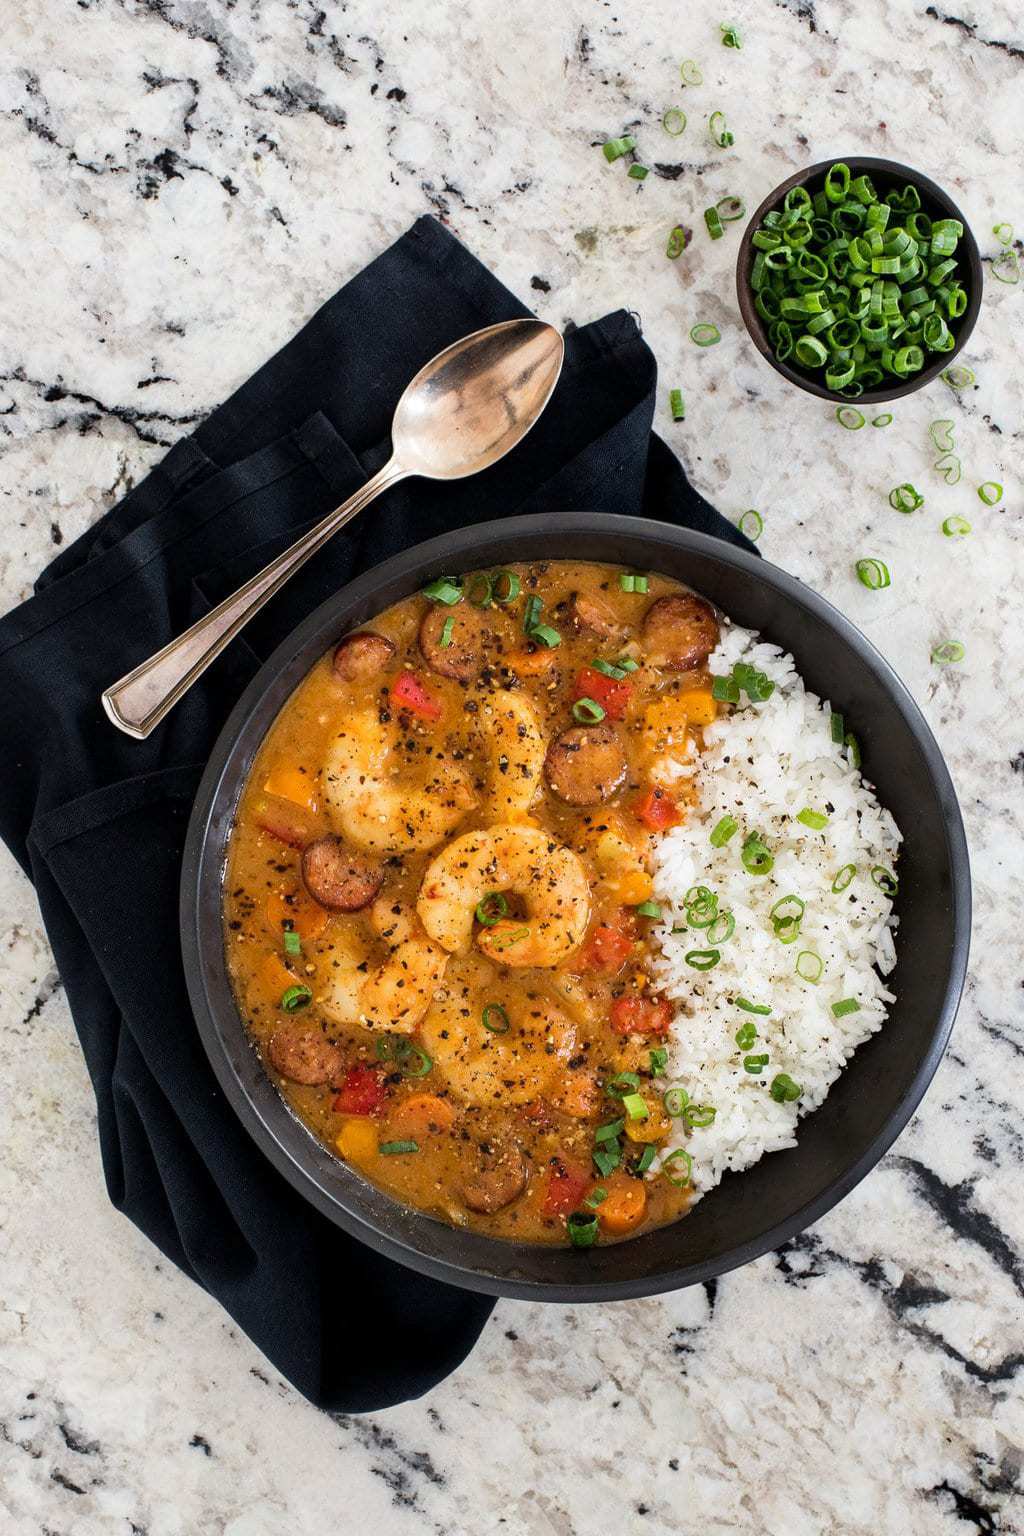 Overhead photo of a bowl of Shrimp and Andouille Gumbo on a granite countertop with a small bowl of green onions and a black napkin.